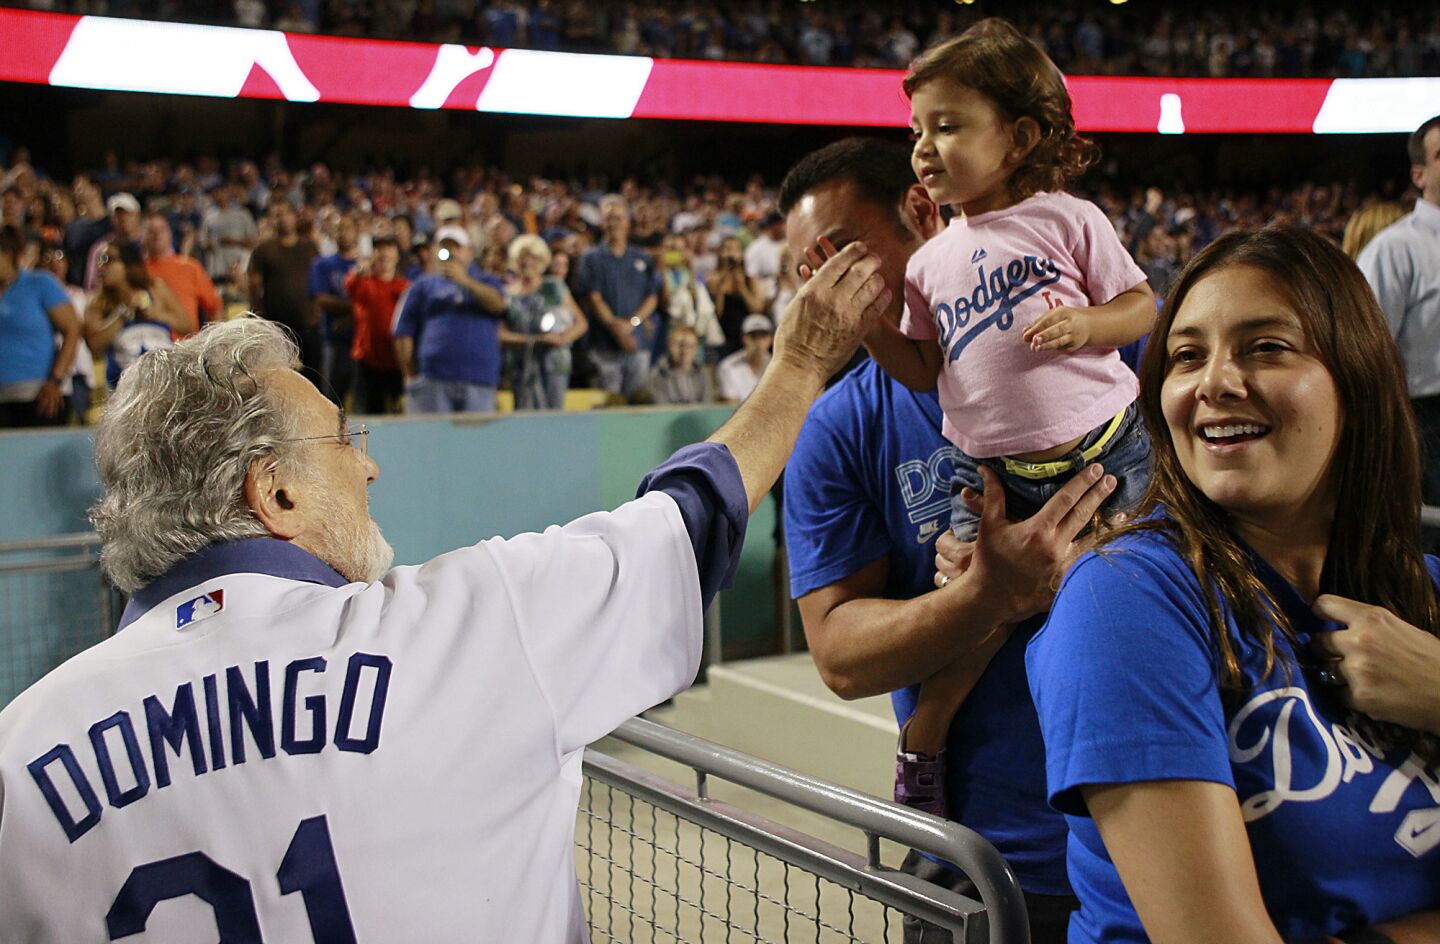 Opera star Placido Domingo greets a young Dodgers fan as he leaves the field after singing "God Bless America" and "Take Me Out to the Ball Game" during the seventh inning stretch at Dodger Stadium. More: Plácido Domingo leads an uptempo life